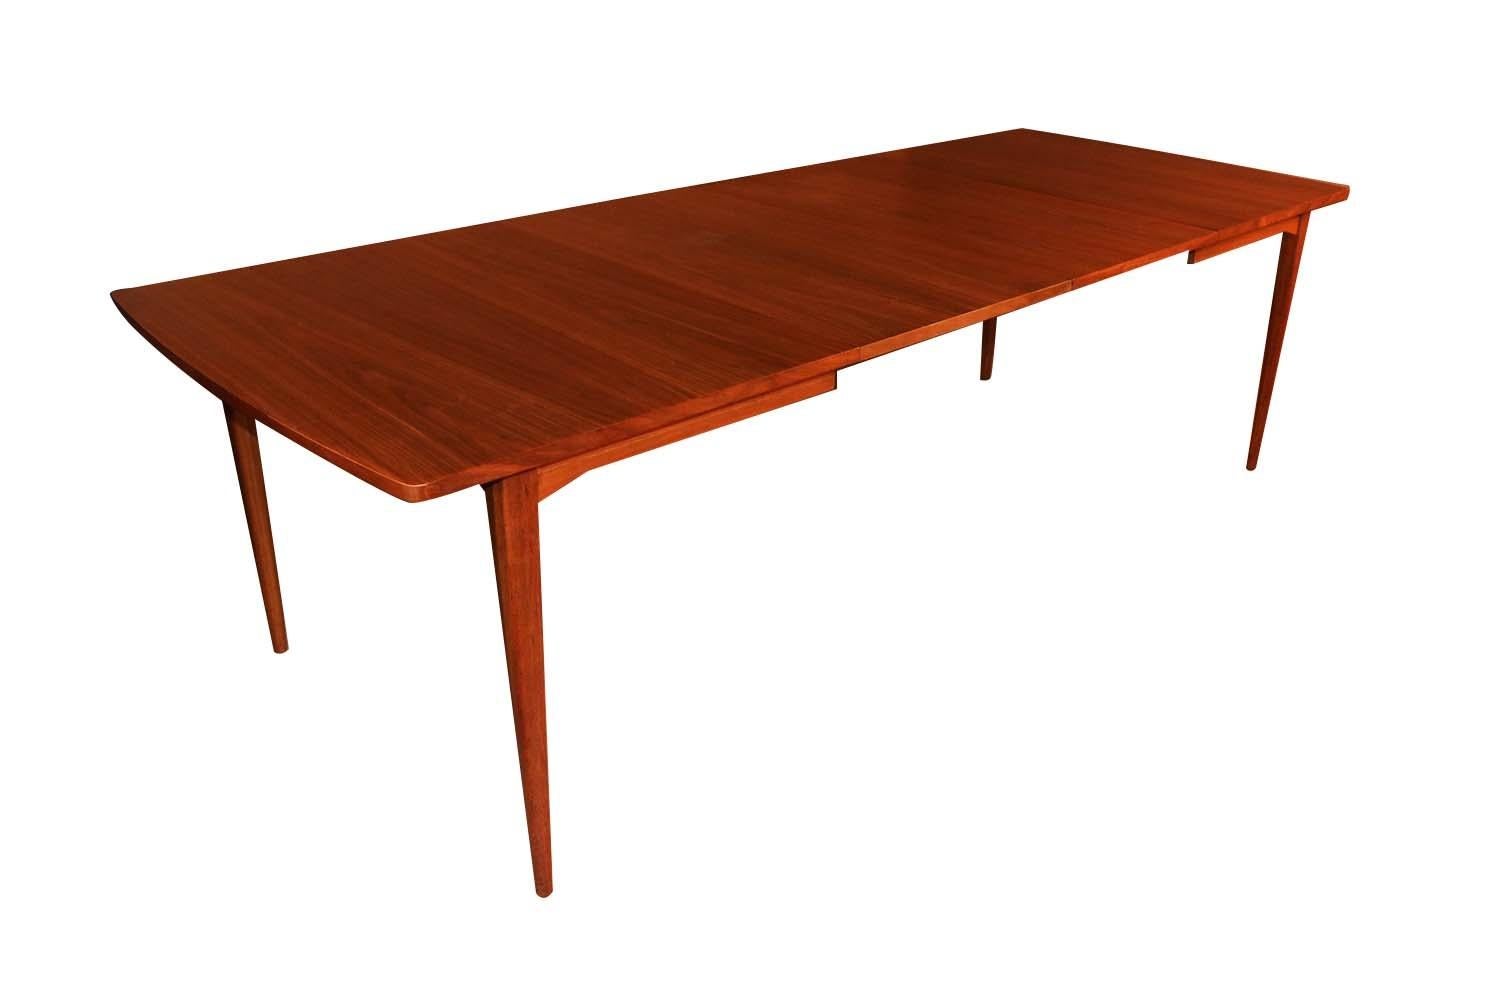 Beautiful Mid-Century Modern expandable dining table designed by Kipp Stewart for Drexel Declaration dated 1961. Features richly bookmatched grained, walnut, clean lines characteristic of Classic Danish design. Raised over four solid walnut tapered